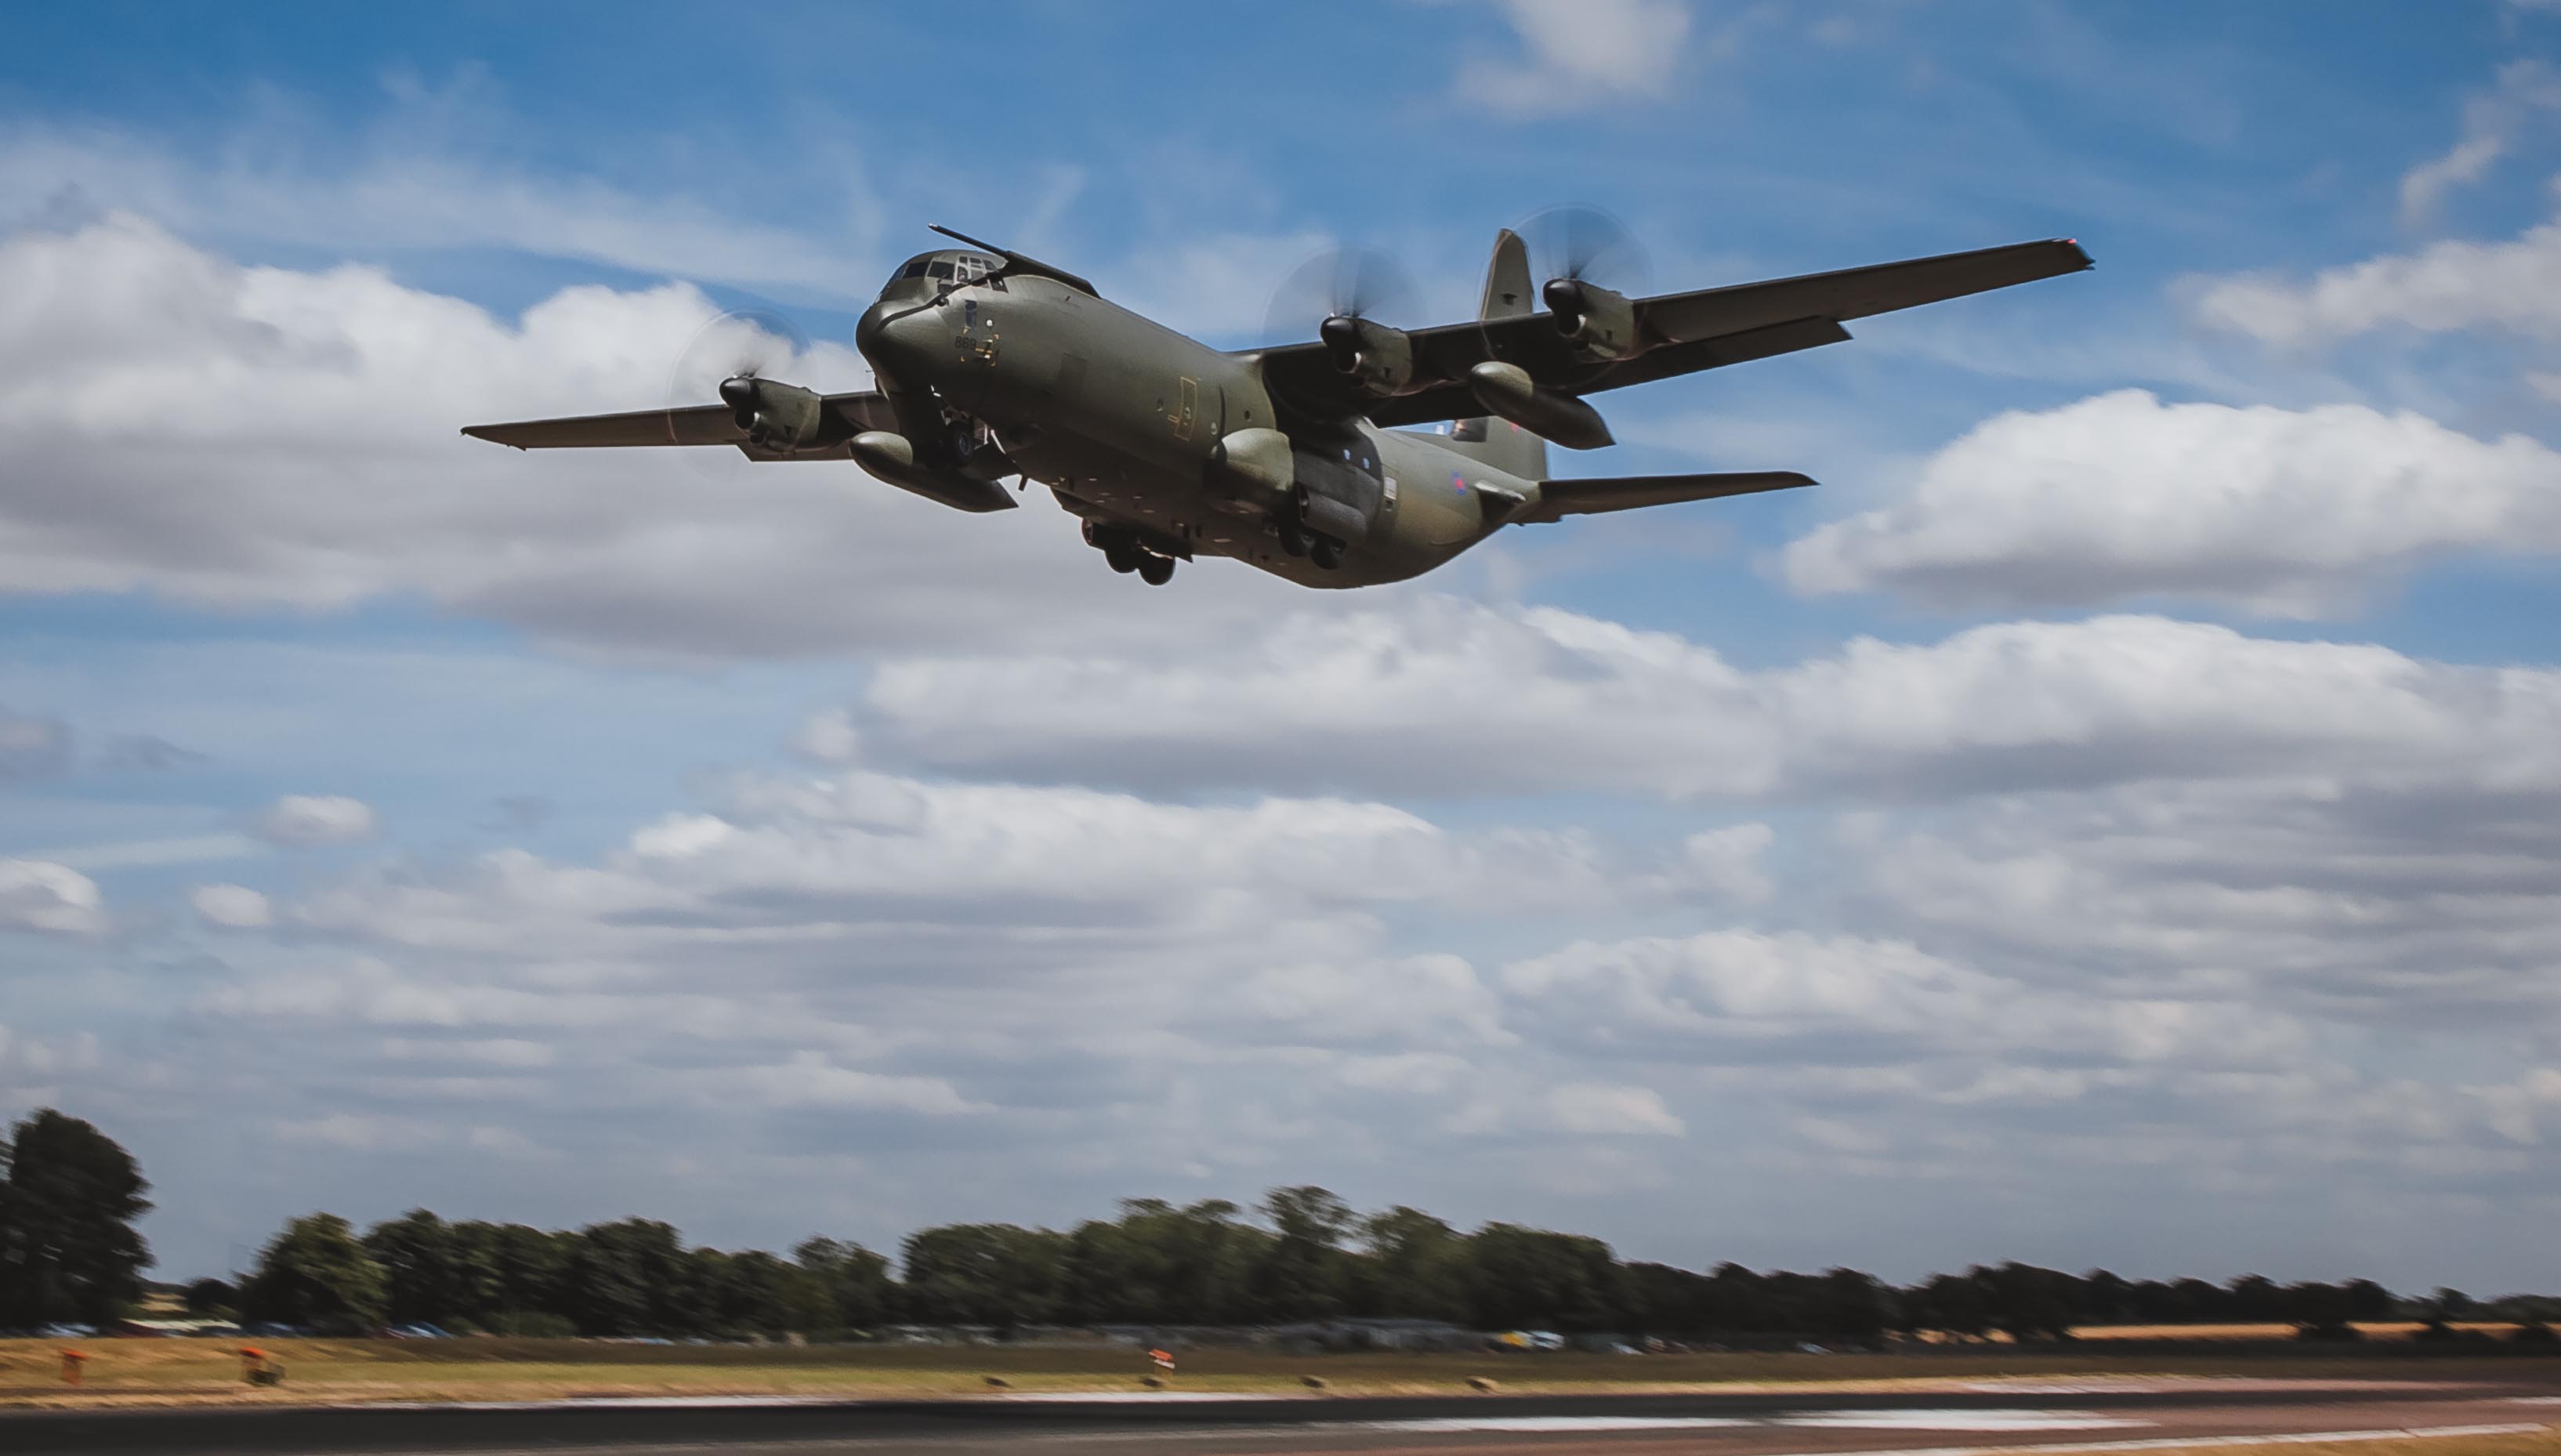 Image shows Hercules aircraft in flight.